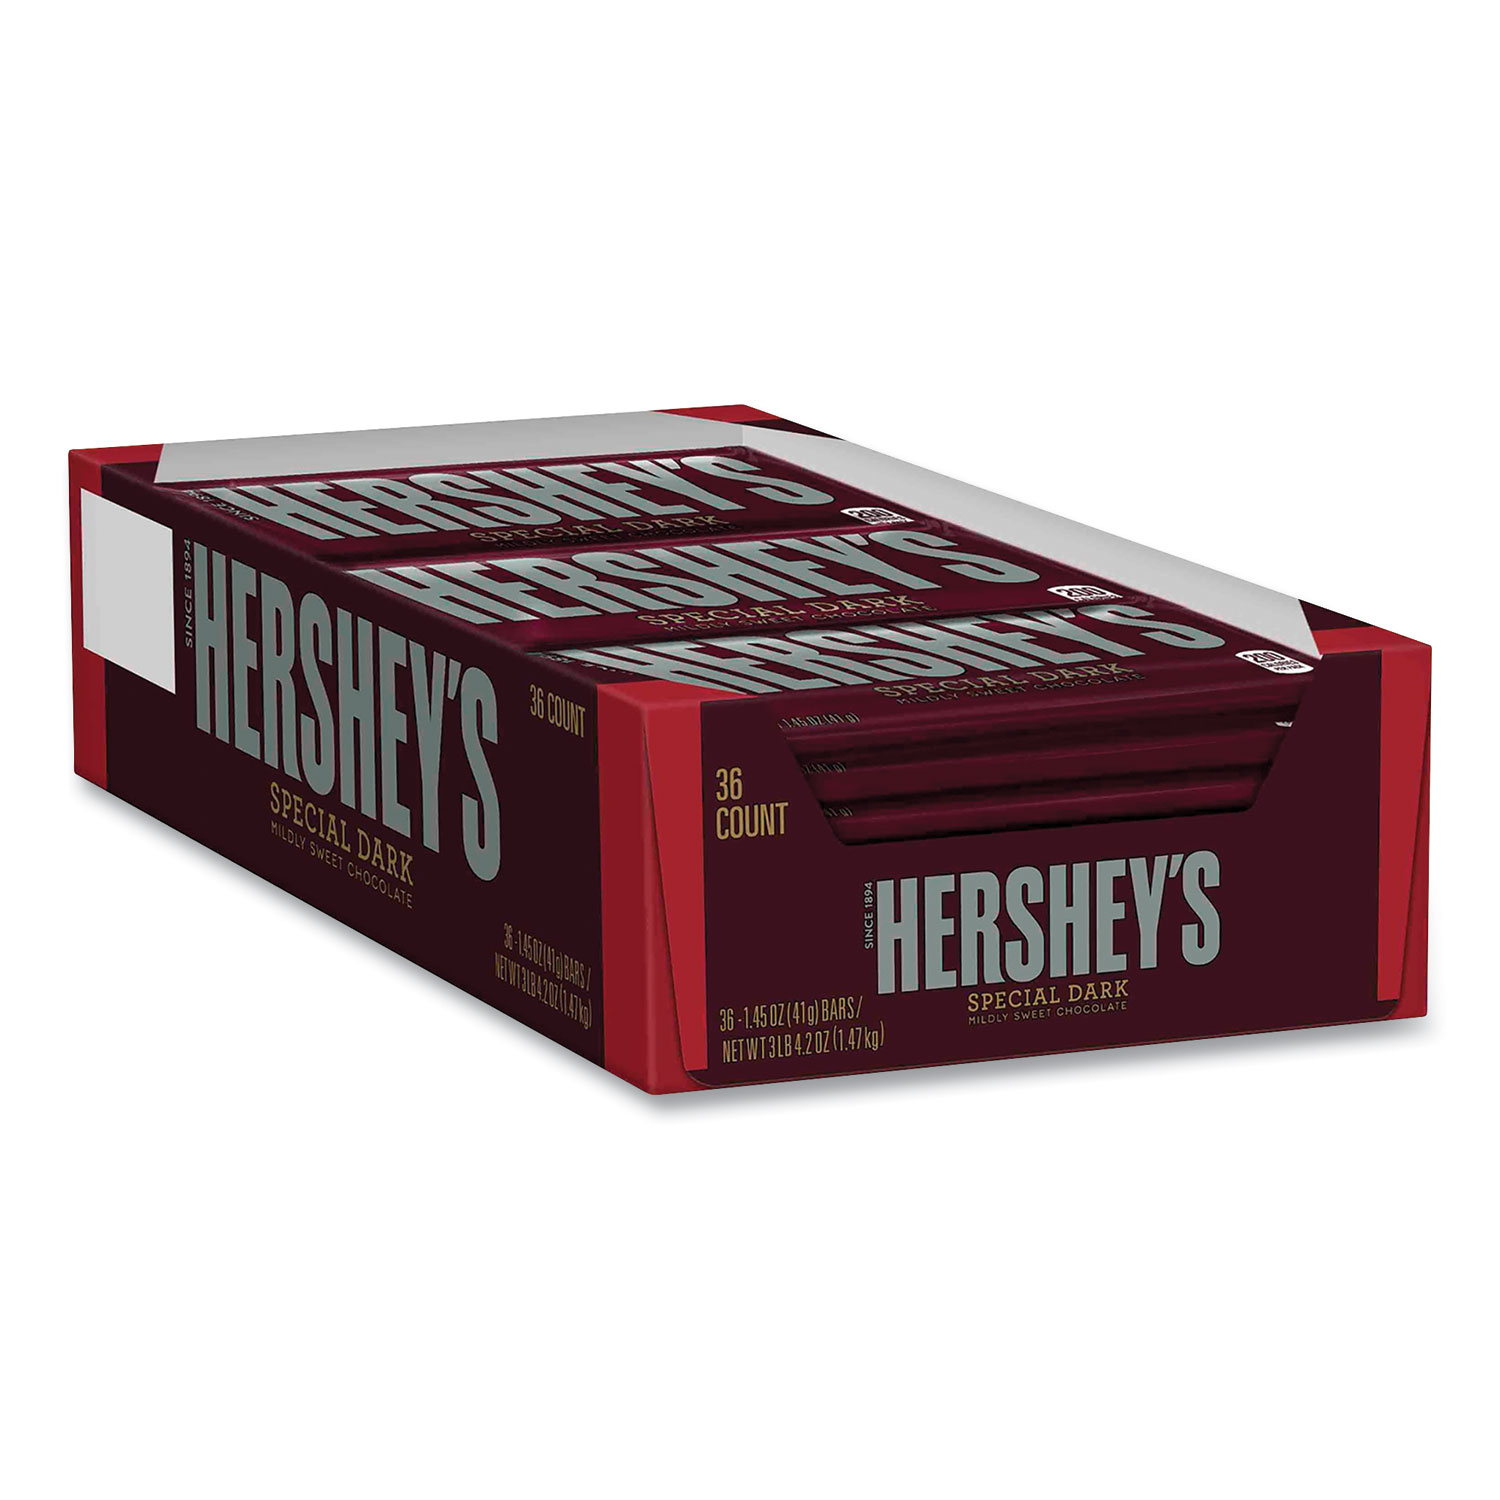  Hershey's 24500 Special Dark Mildly Sweet Chocolate Bar, 1.45 oz Bar, 36/Box, Free Delivery in 1-4 Business Days (GRR24600186) 